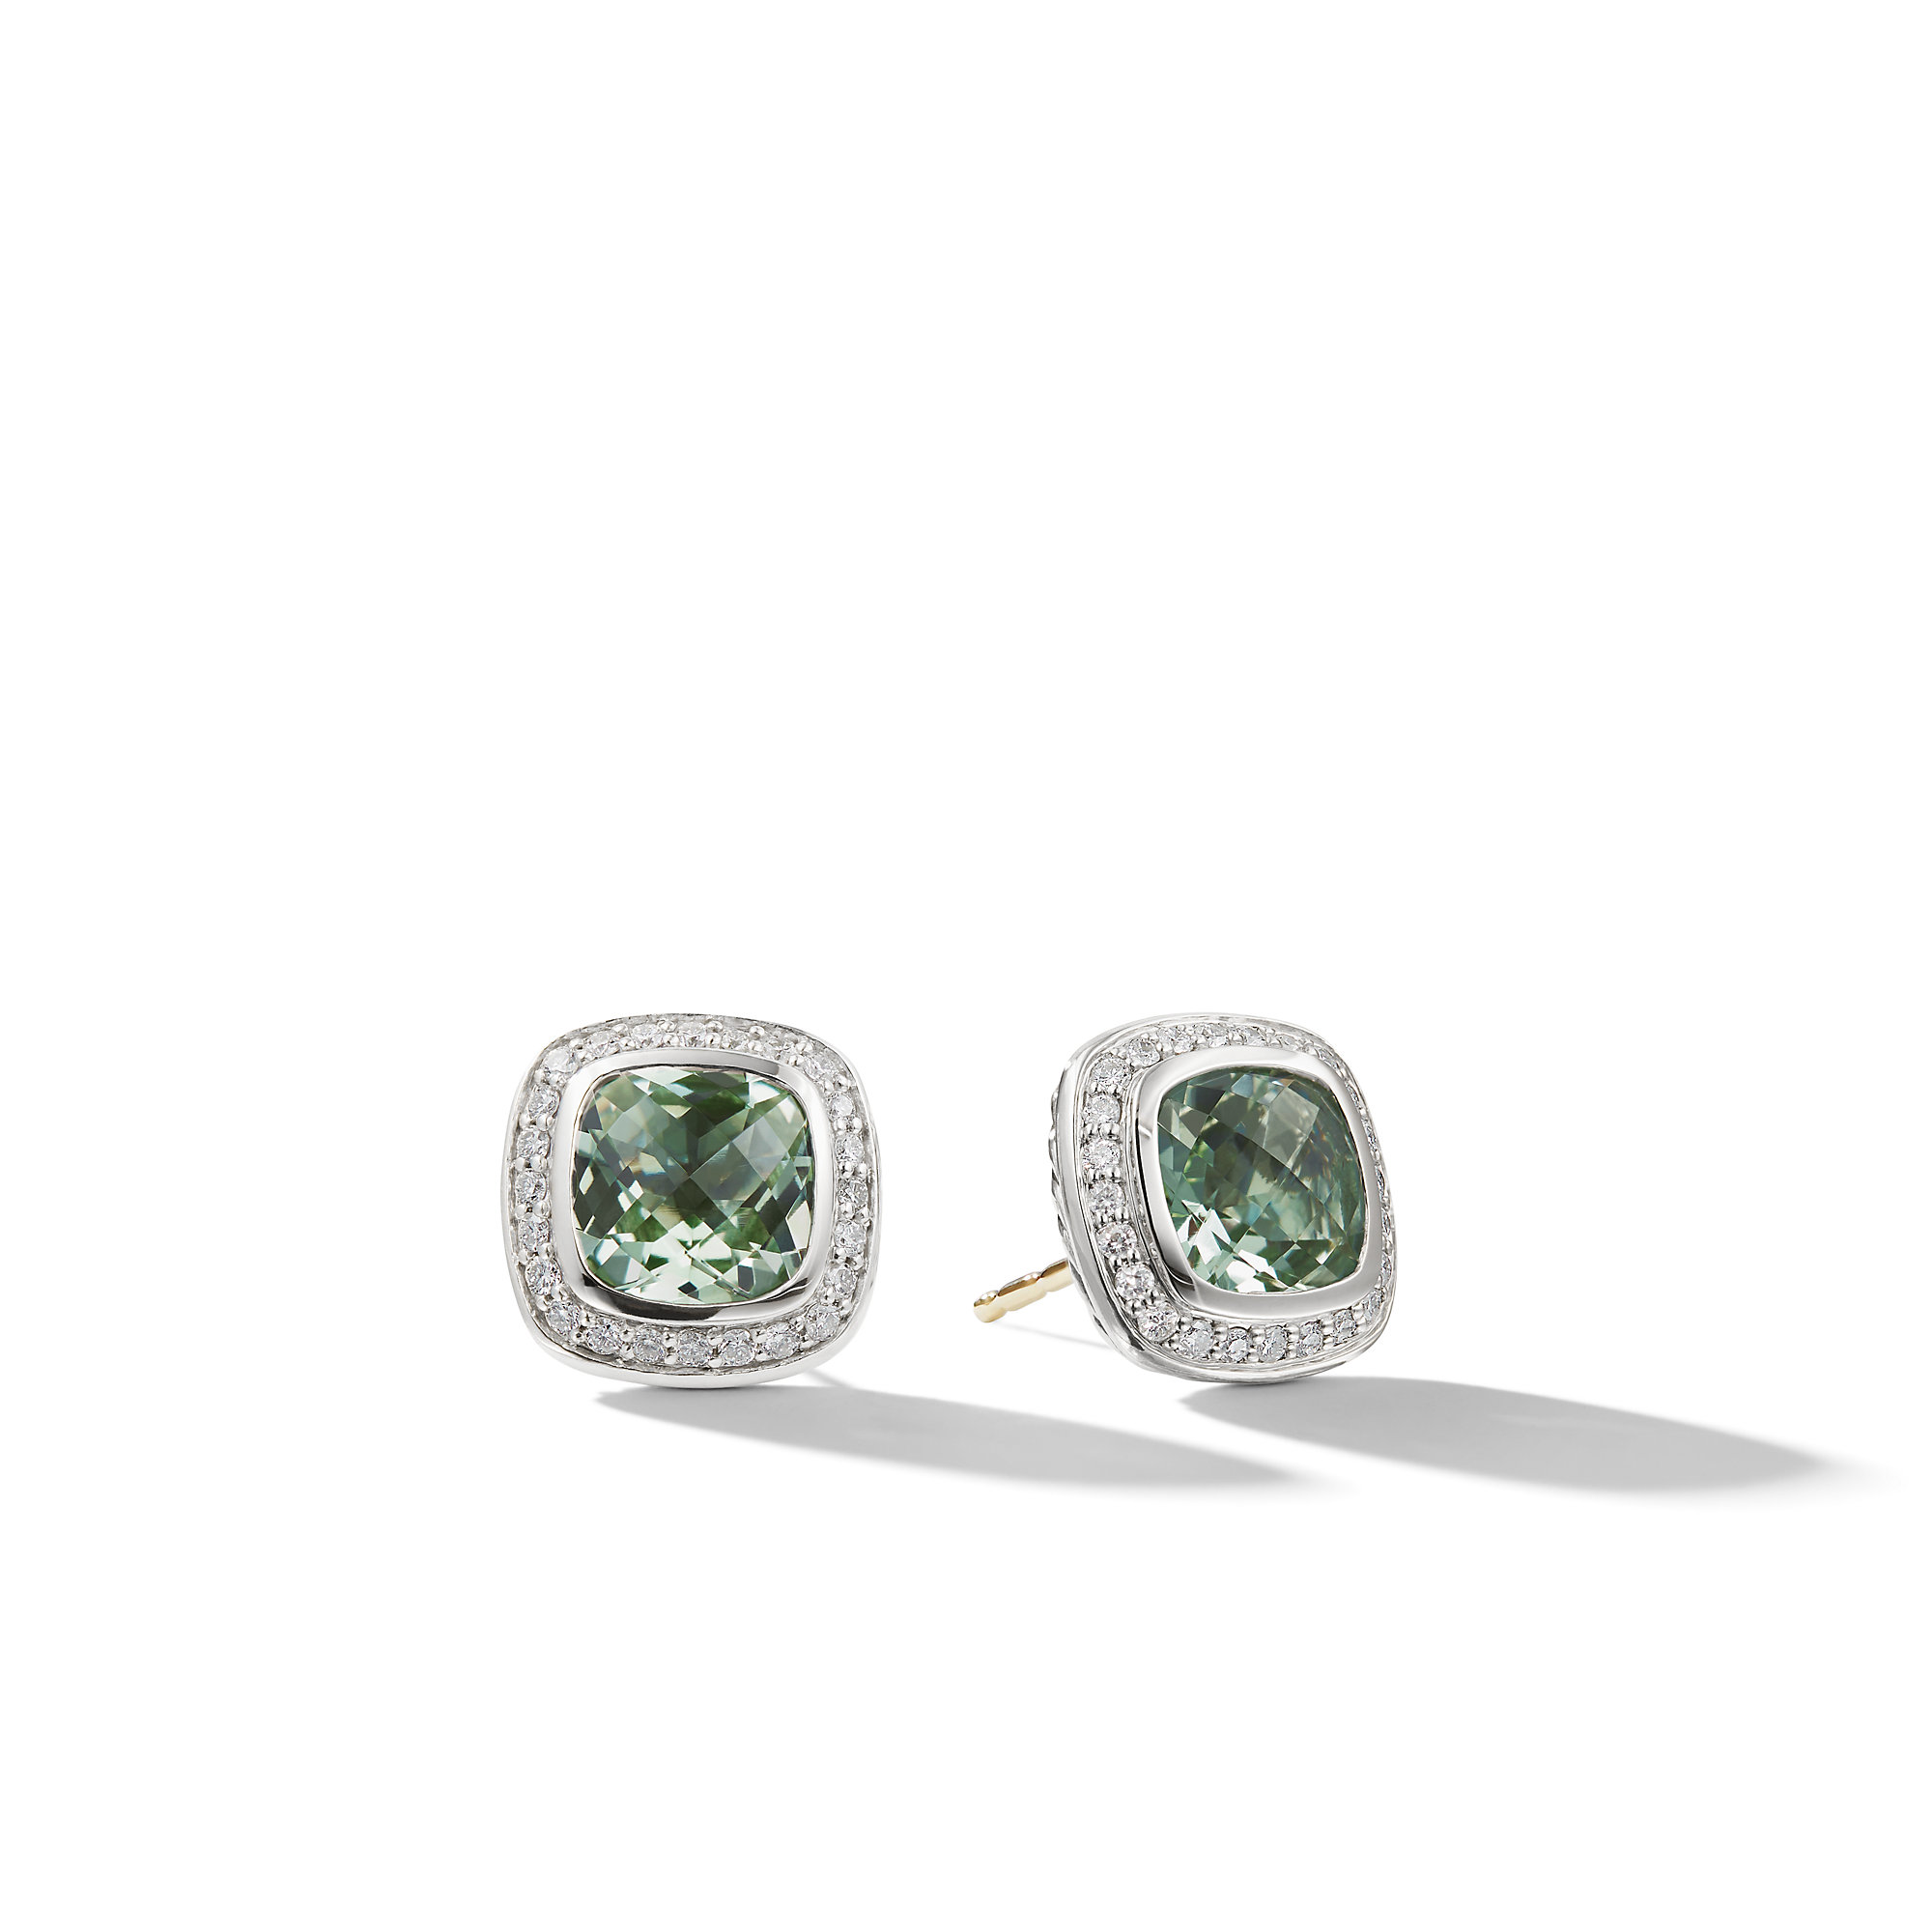 Albion® Stud Earrings in Sterling Silver with Prasiolite and Pave Diamonds